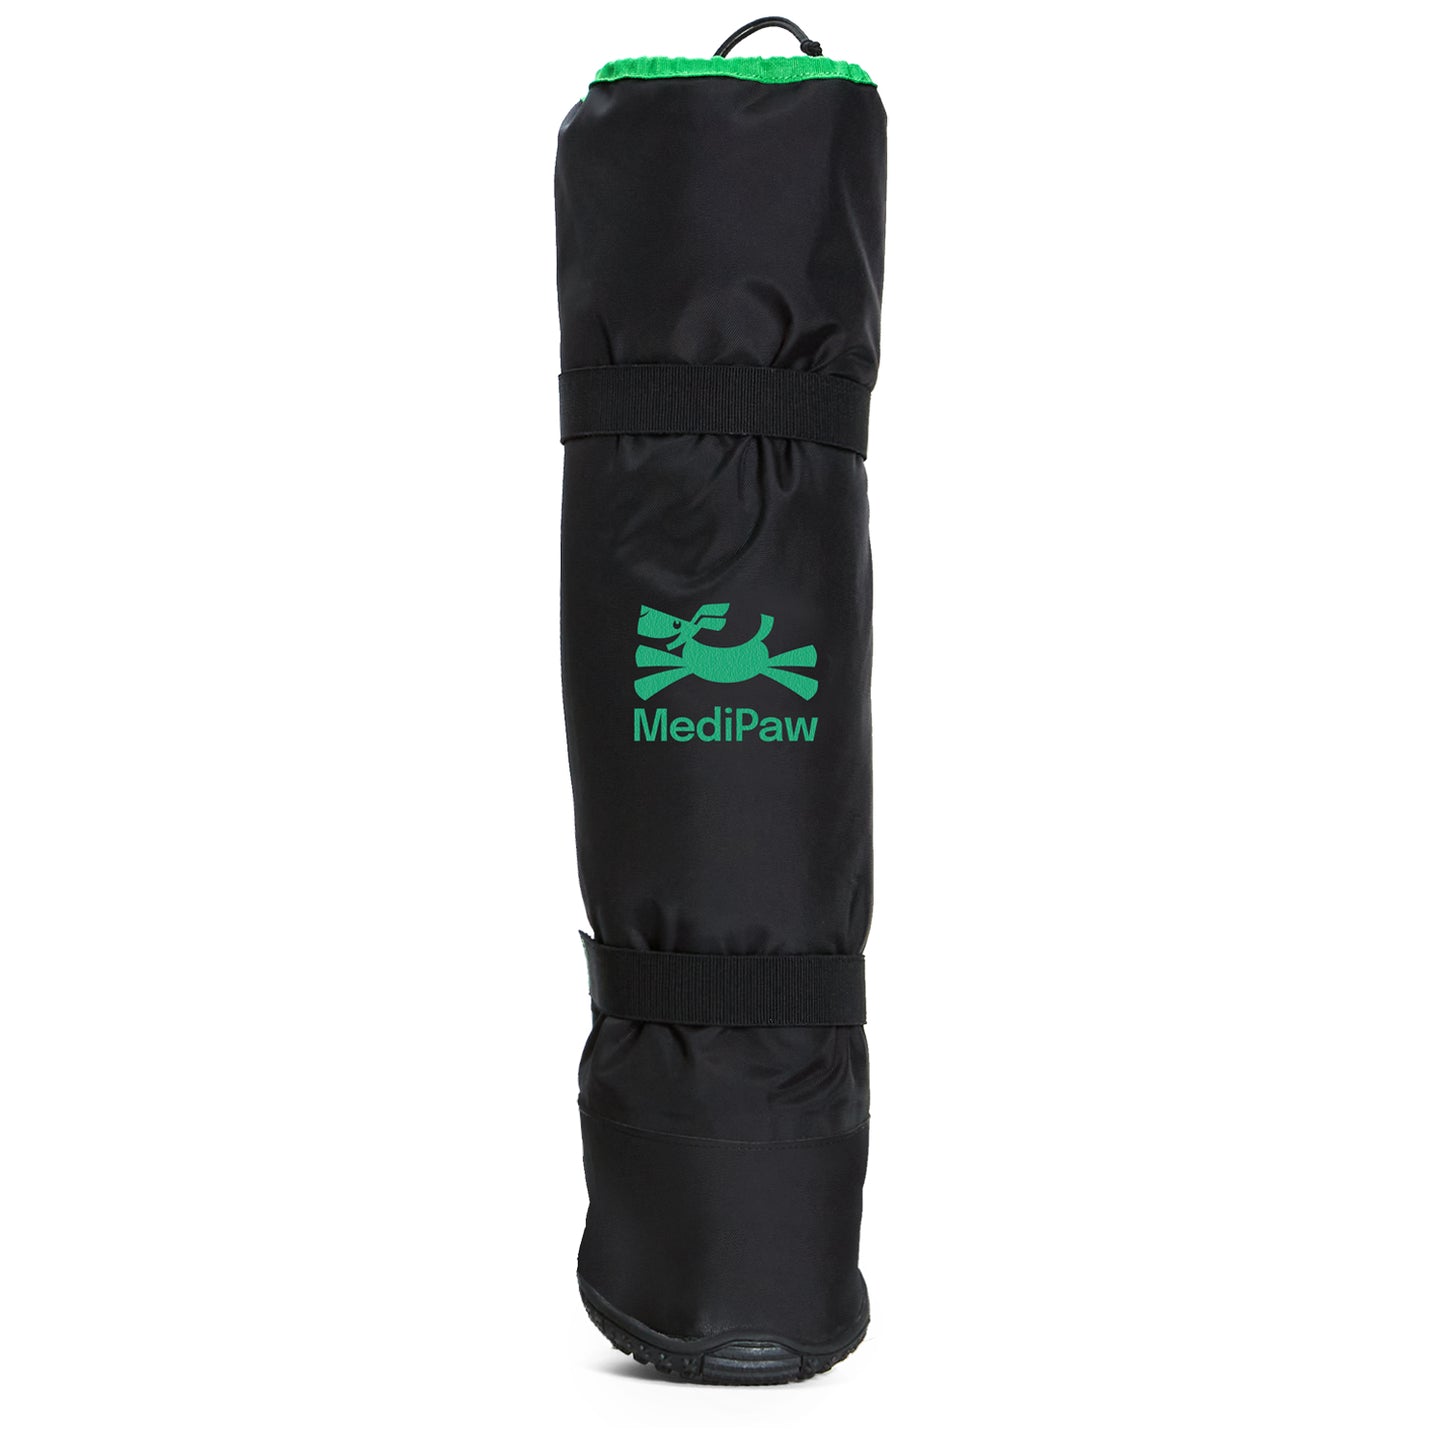 A black and green bag with a logo on it, perfect for carrying Your Whole Dog's MediPaw: Rugged X-Boot items.